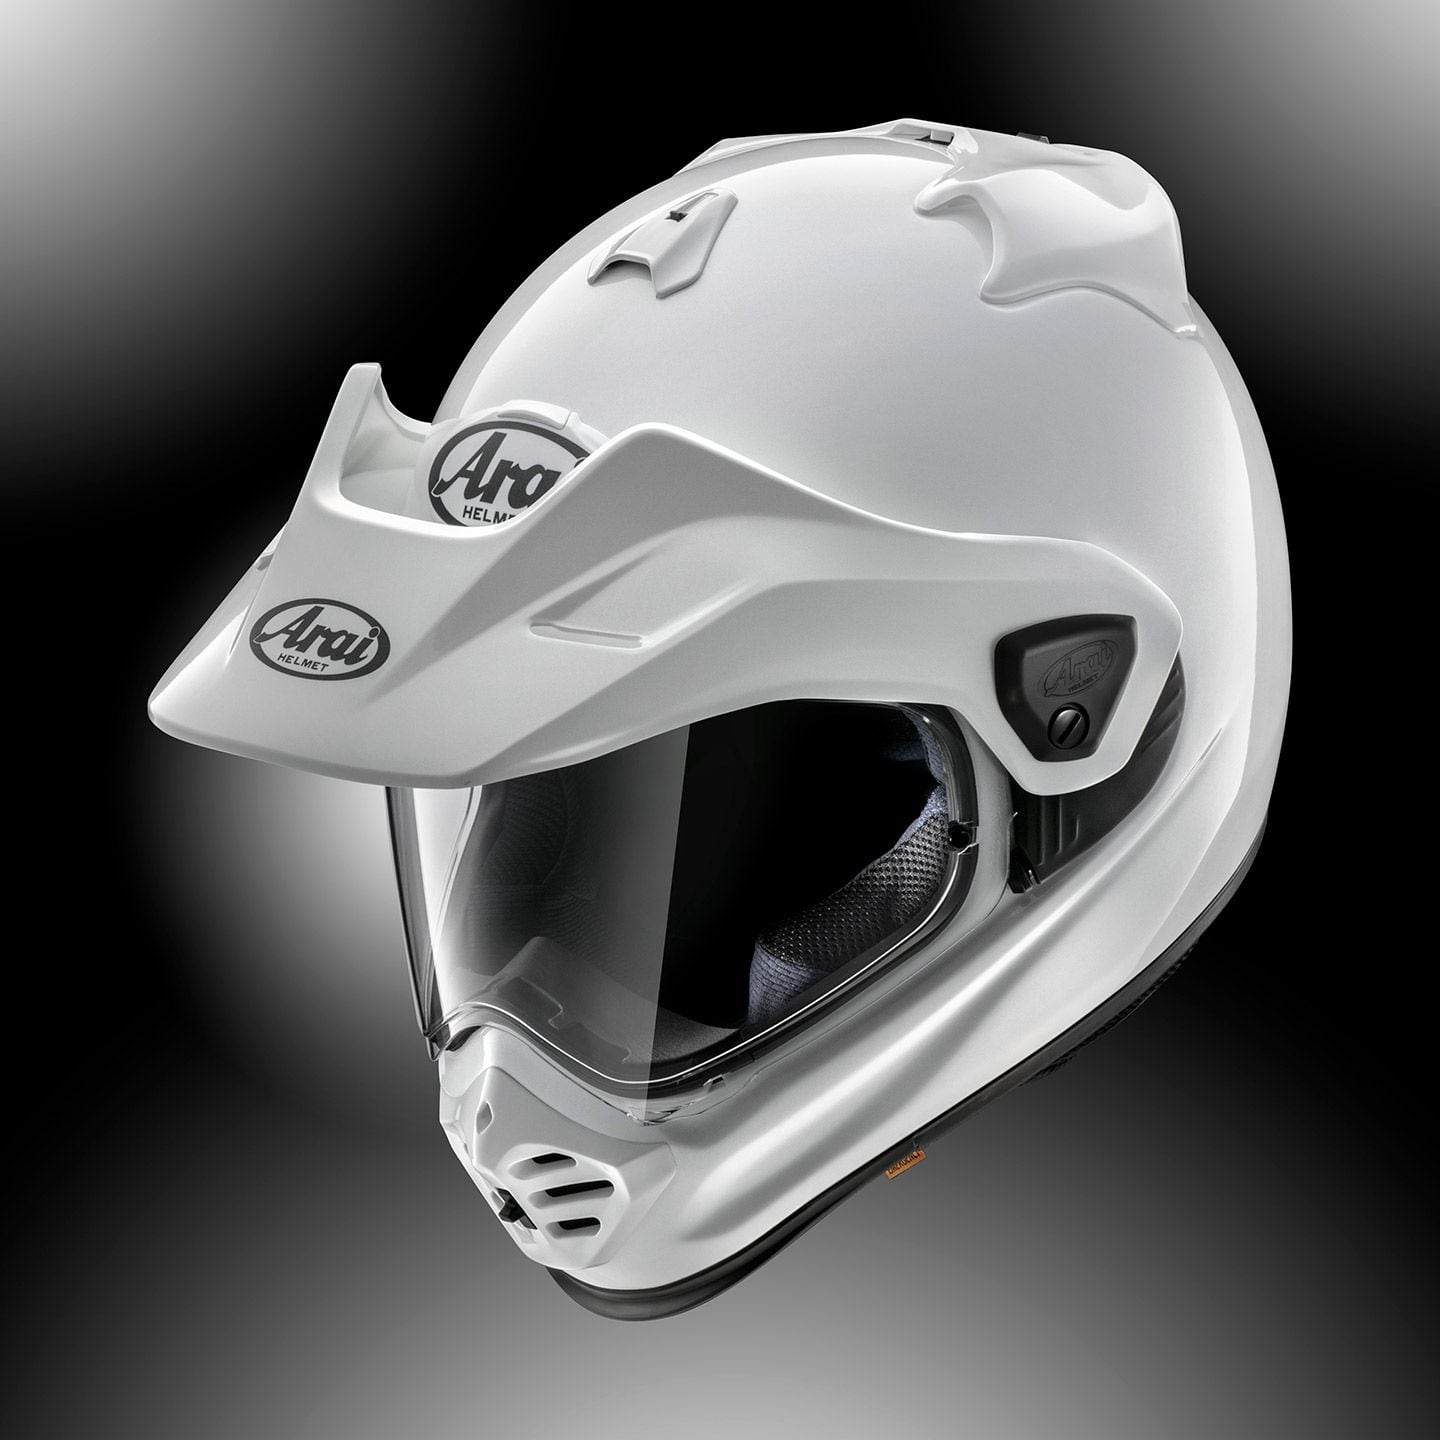 The new Arai XD-5 is great for on- and off-road use.